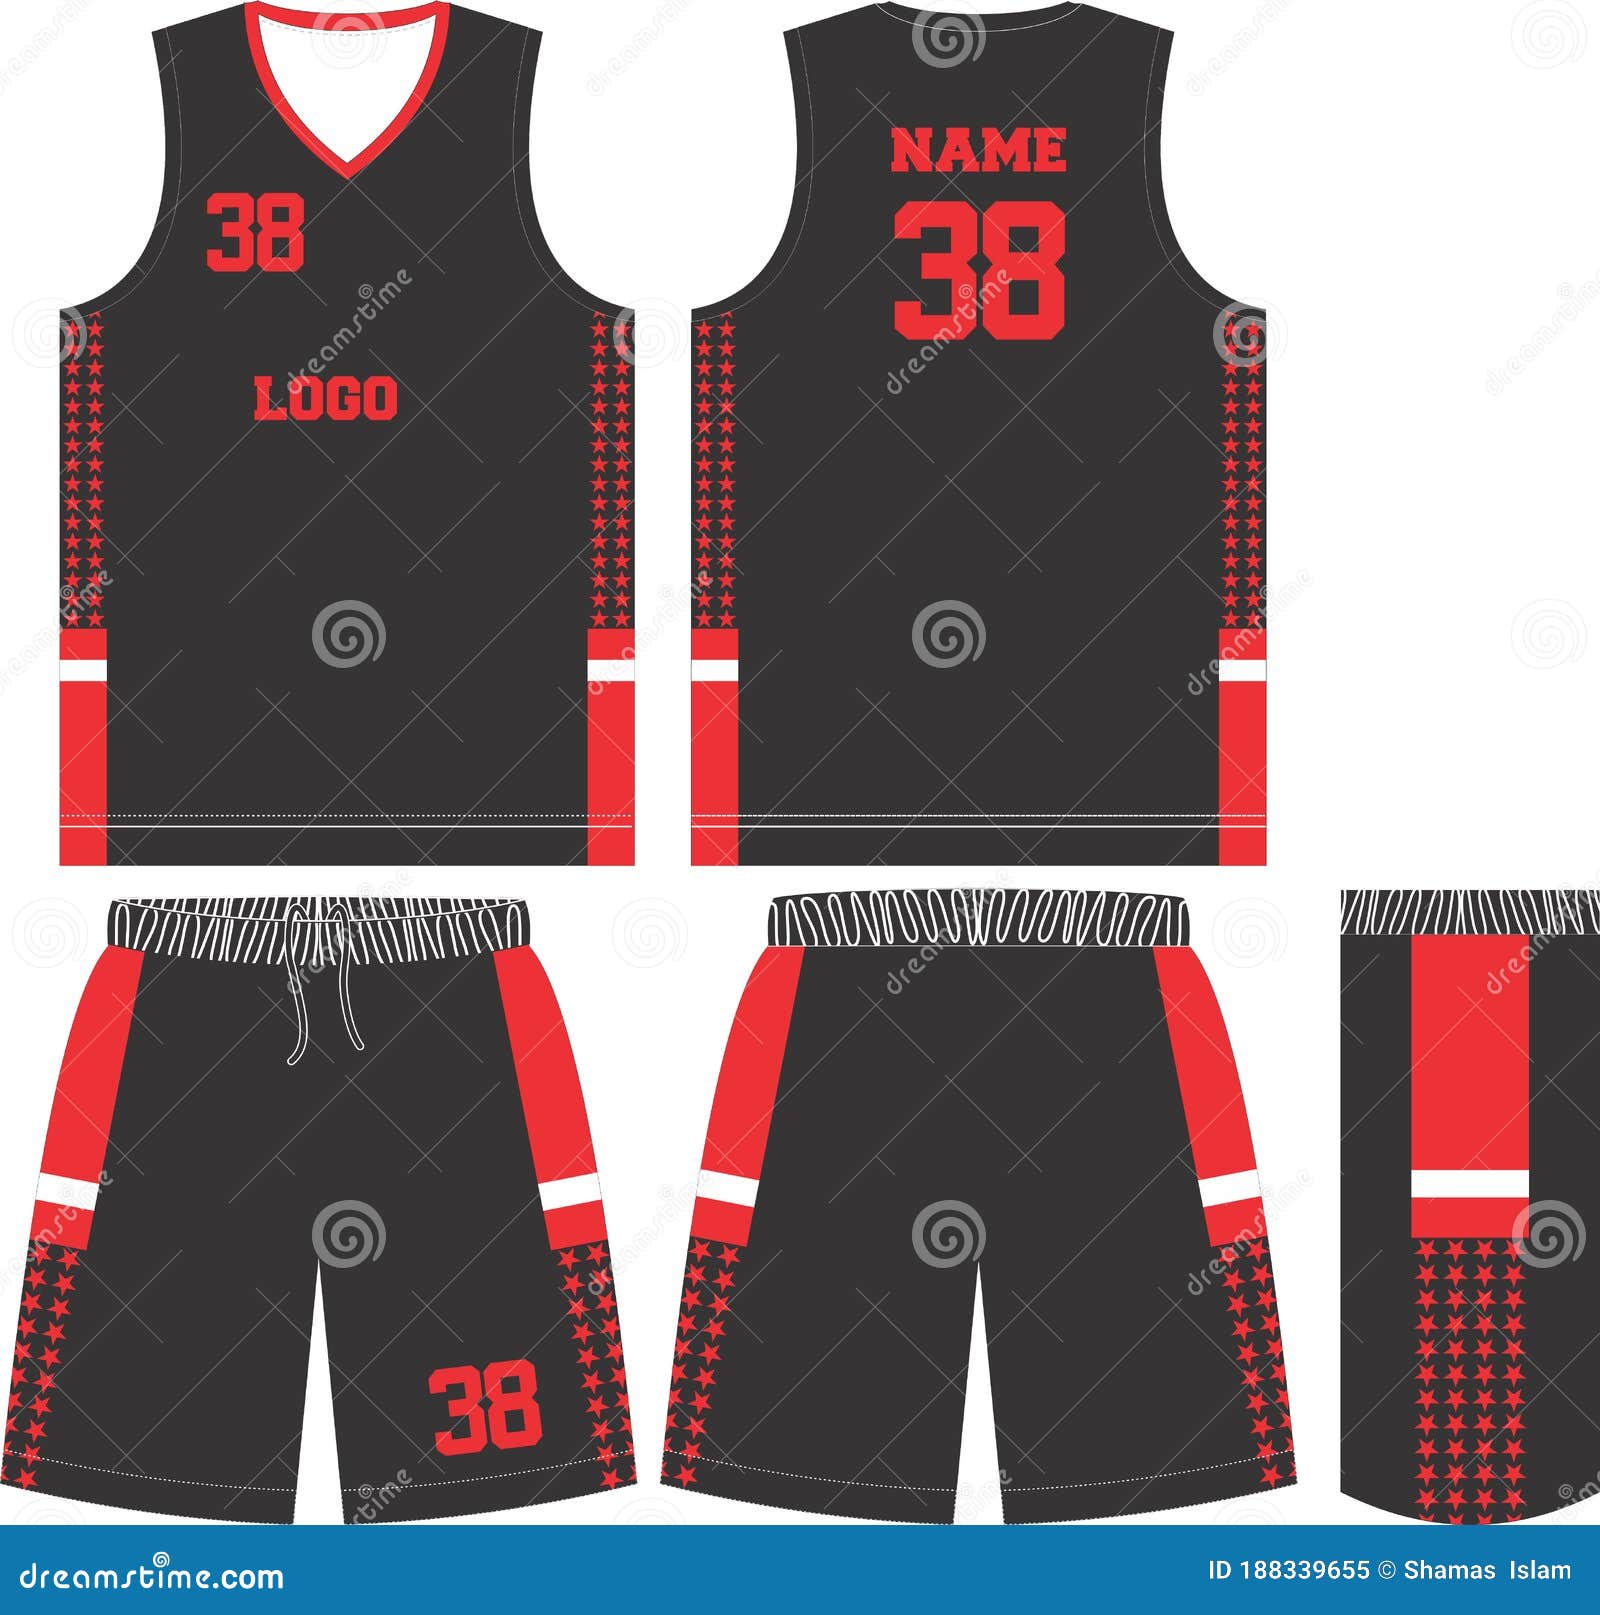 Basketball Uniform, Shorts, Template for Basketball Club. Front